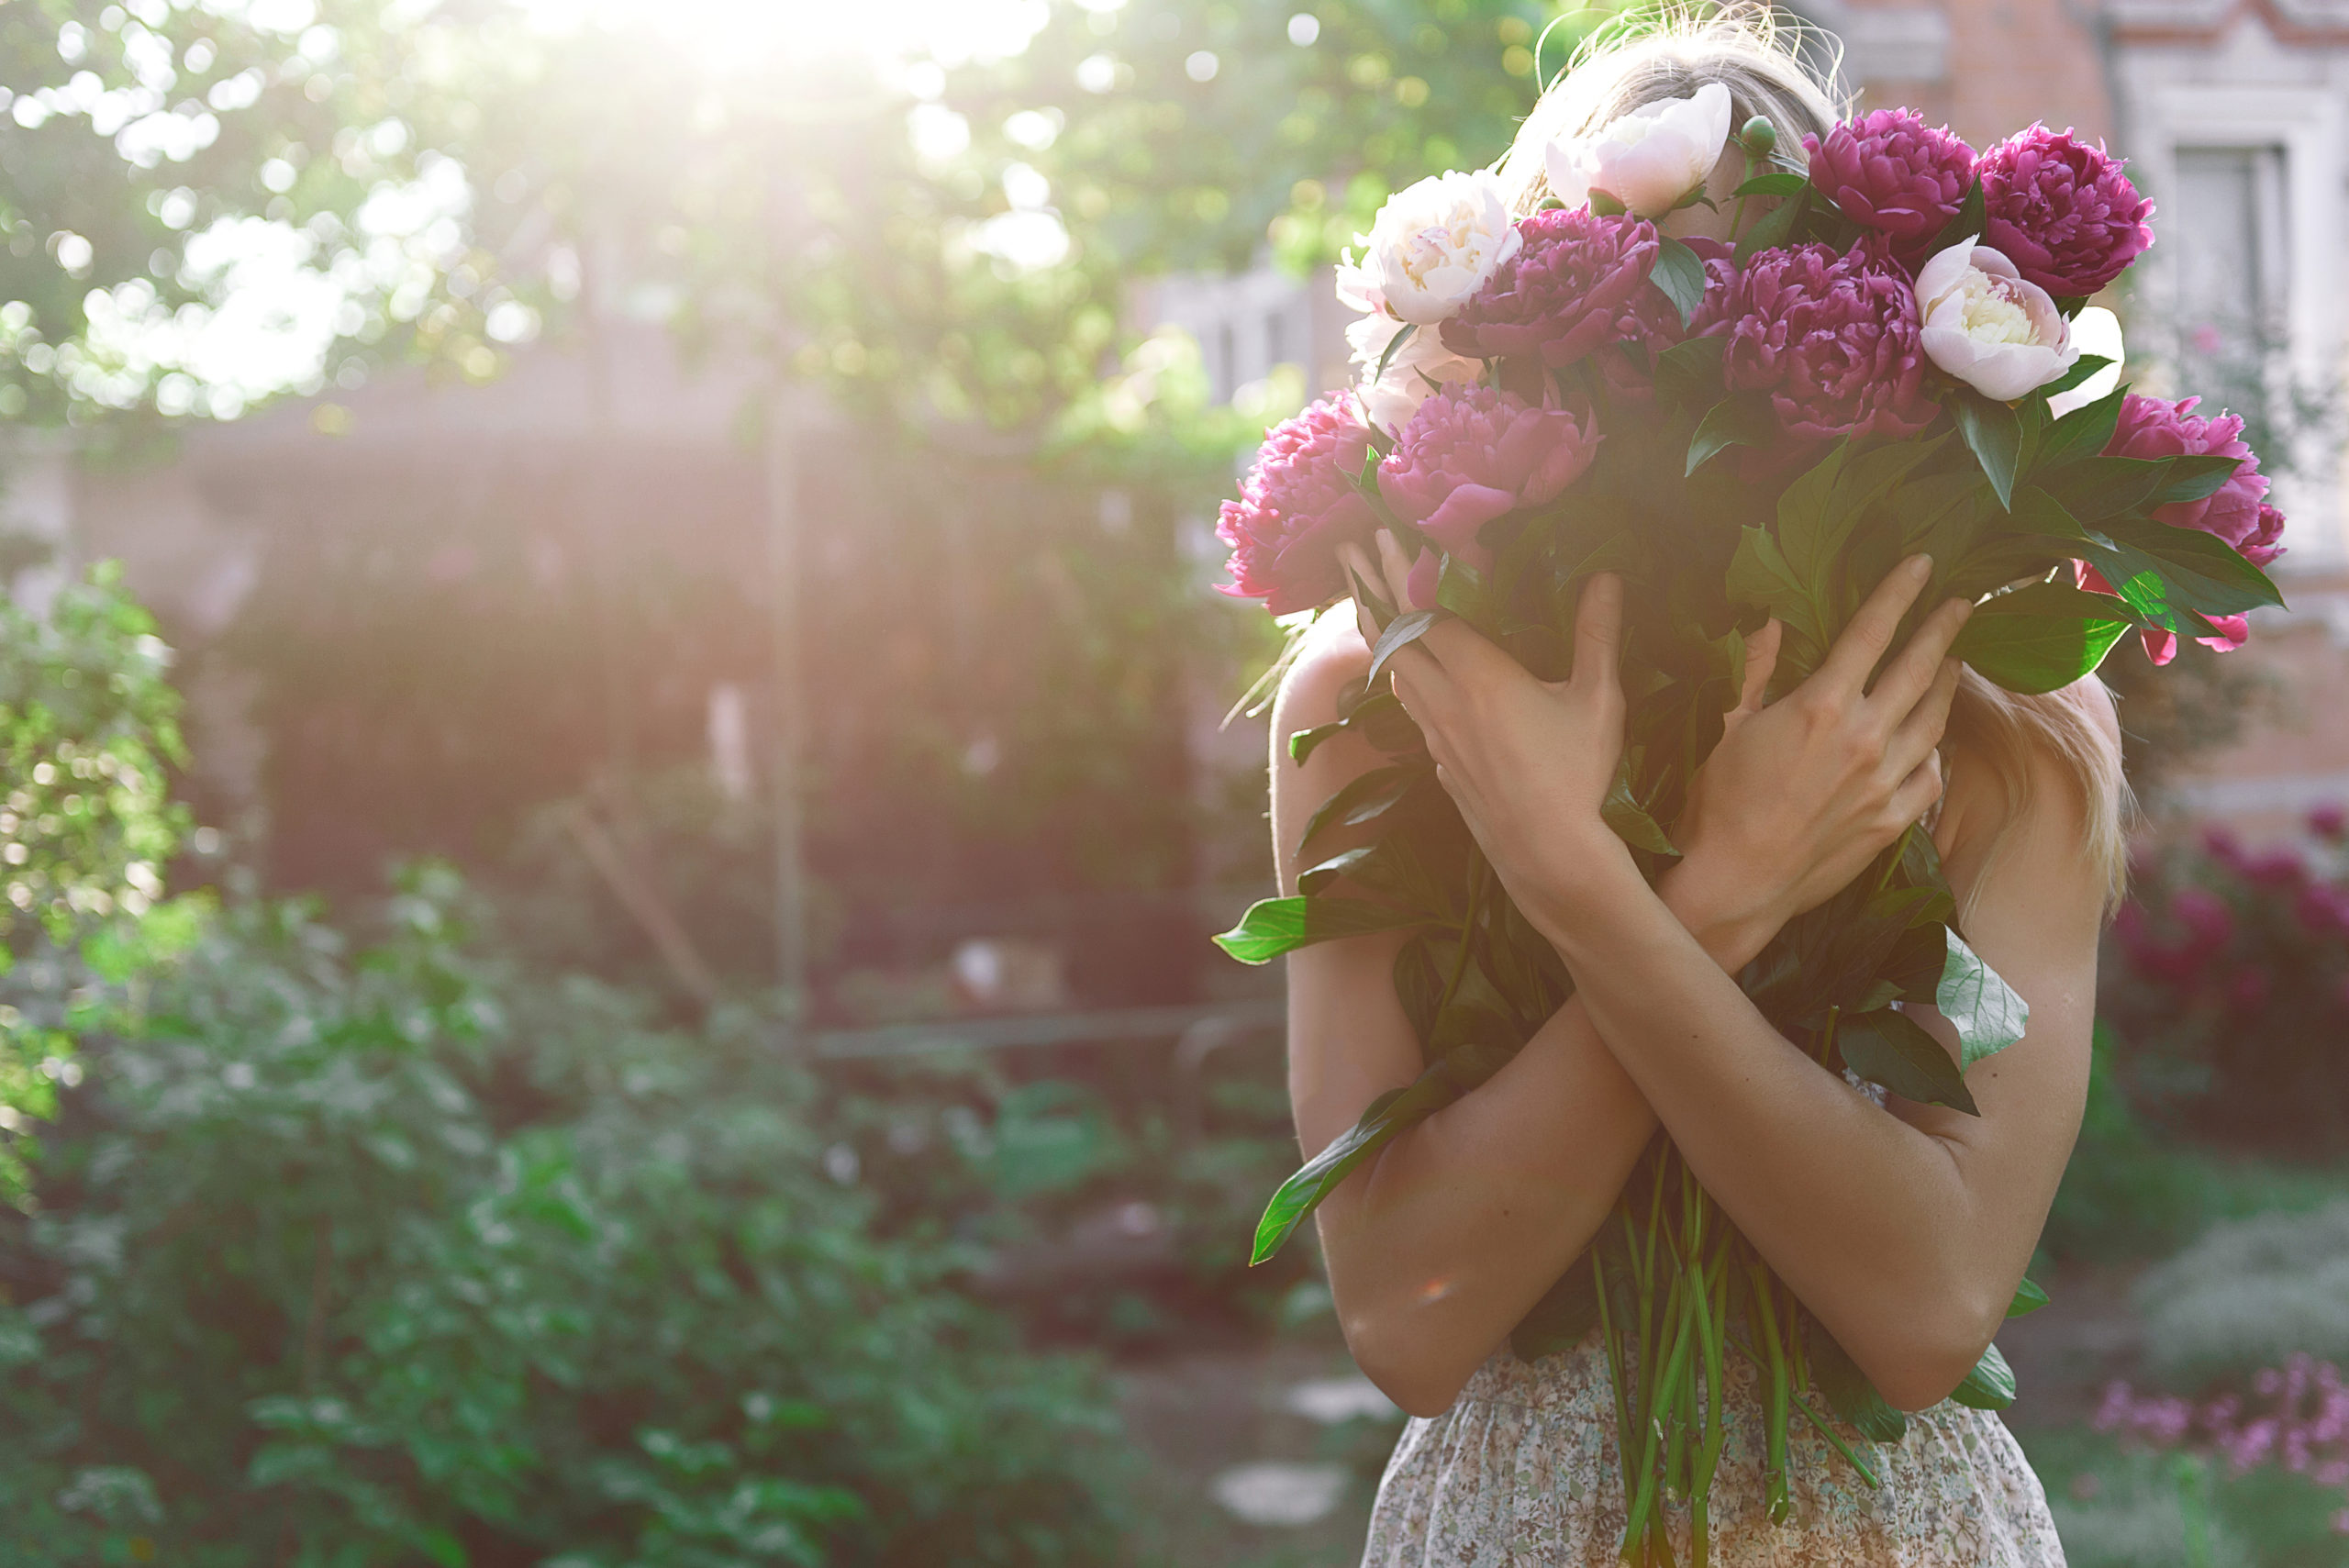 girl in the garden with a big bouquet of peonies in hands at sun